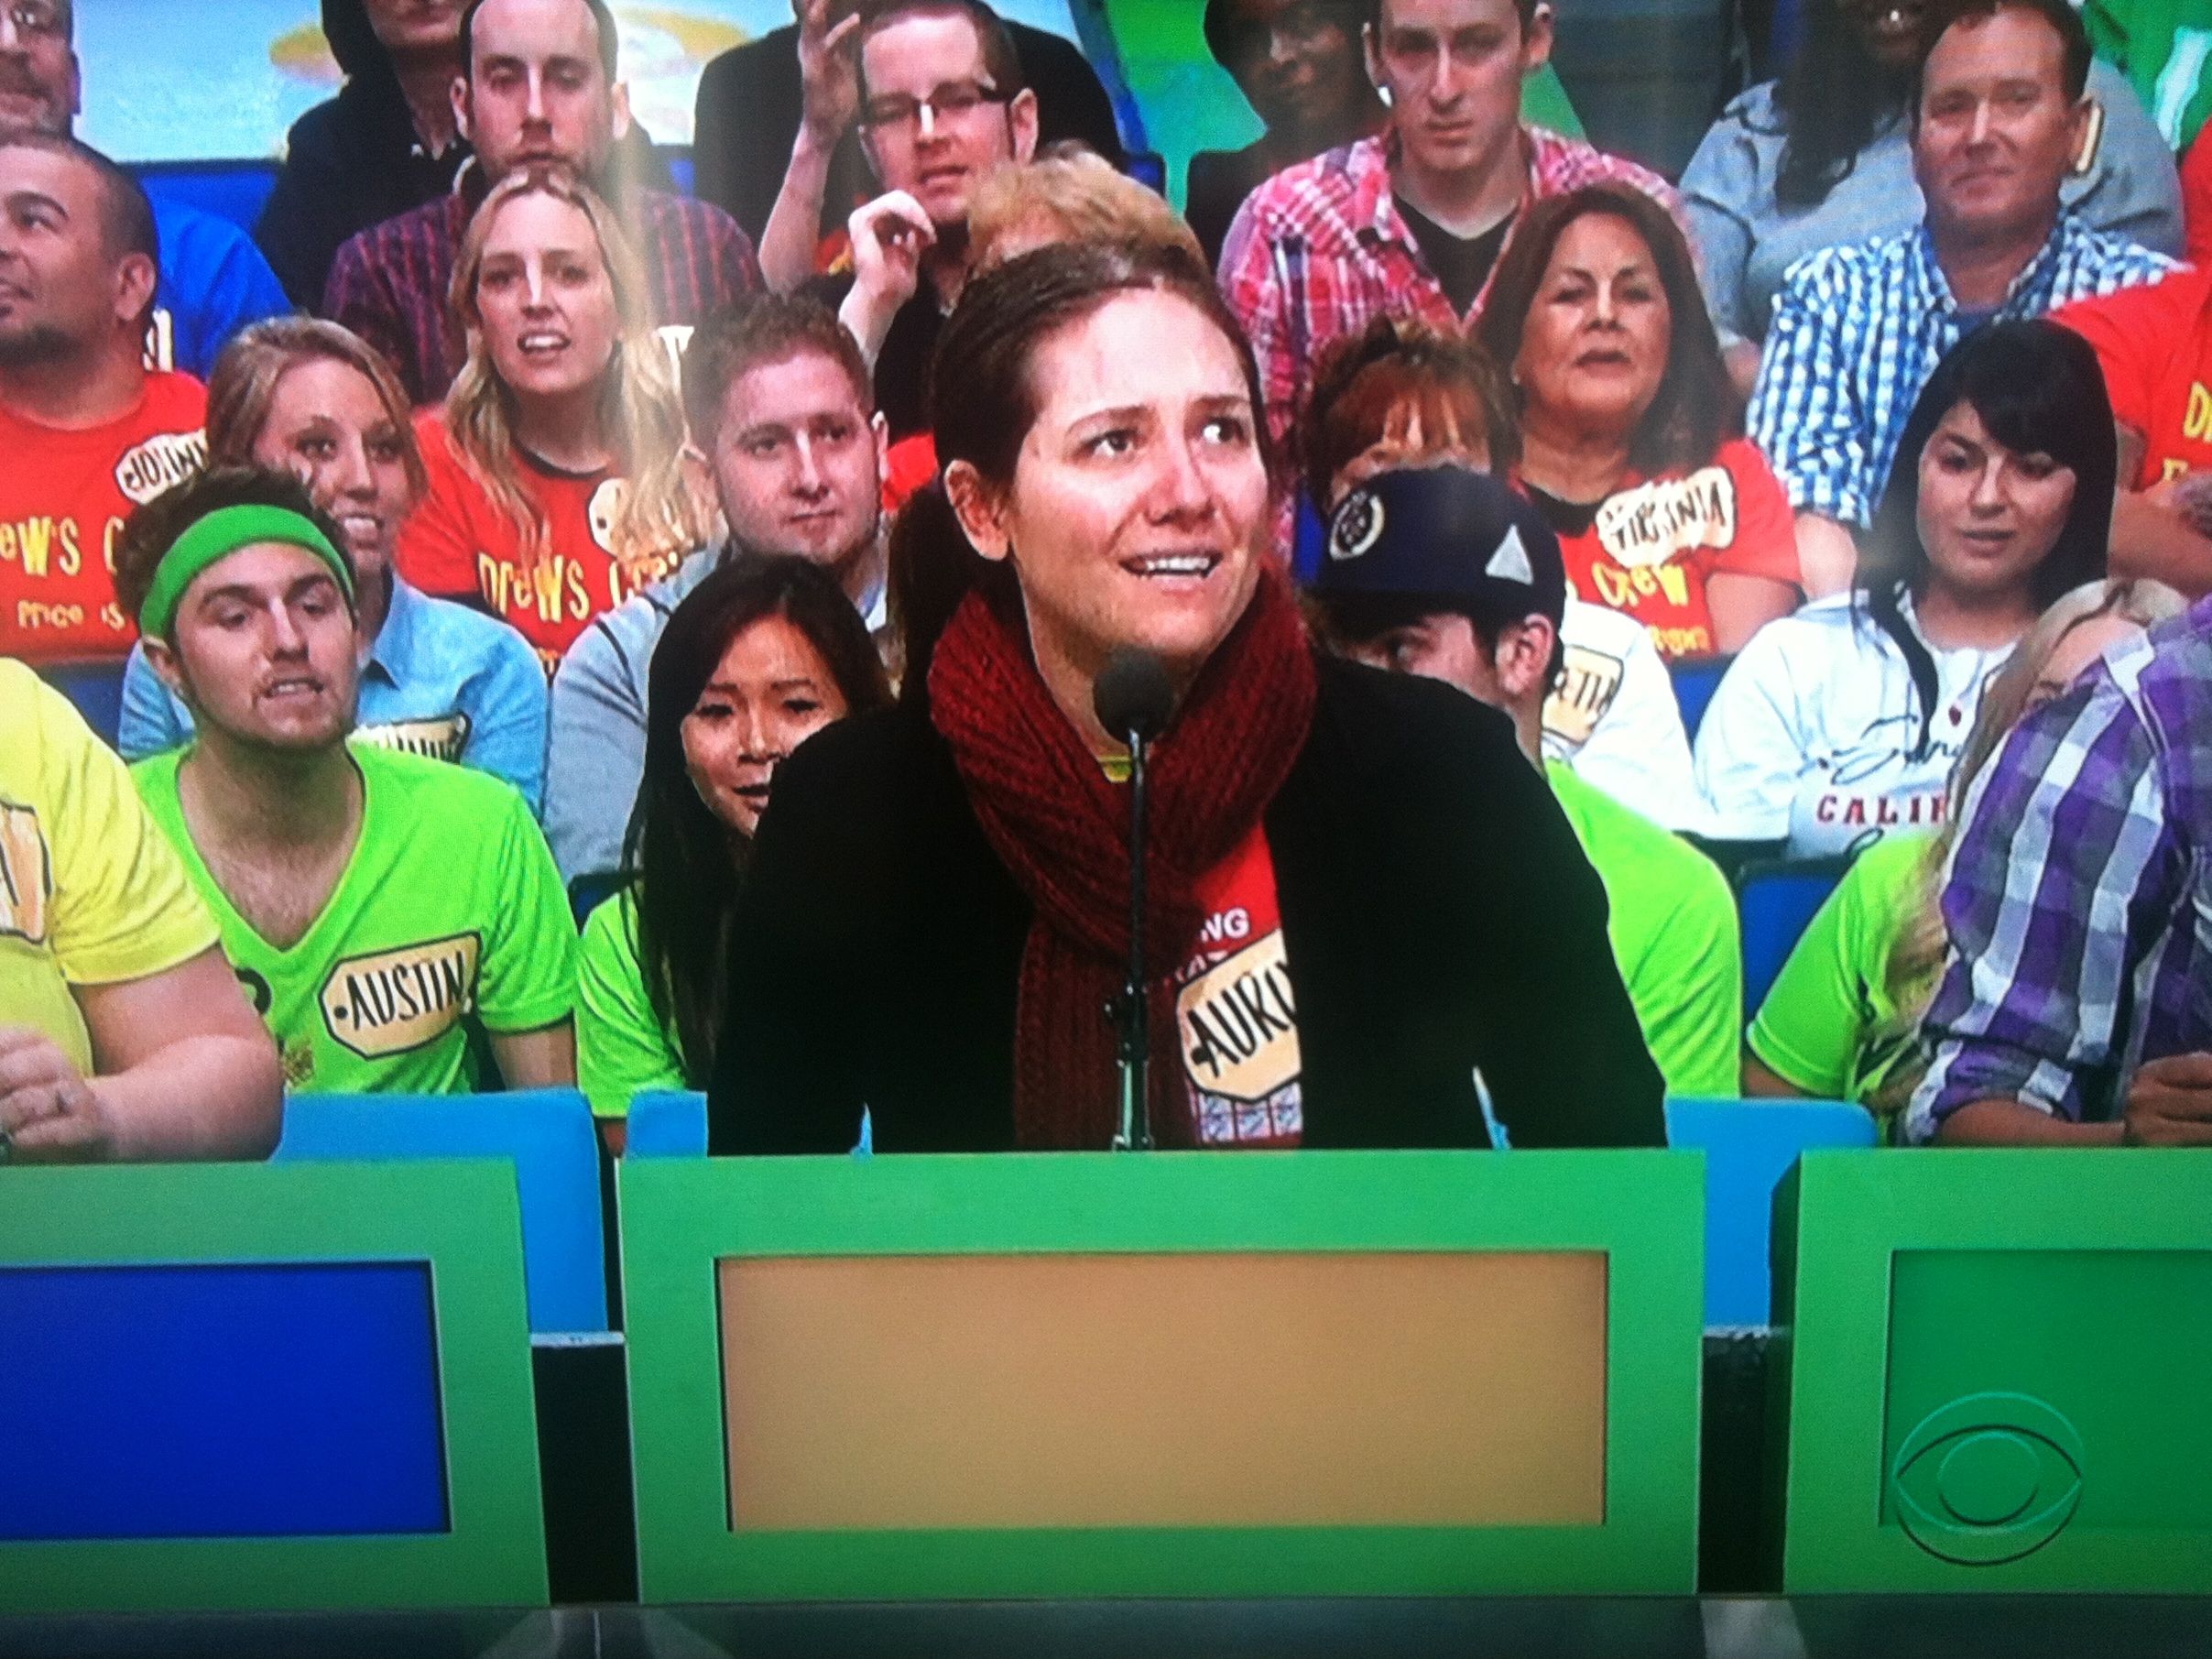 Aurora De Lucia really scared in contestant's row on The Price is Right